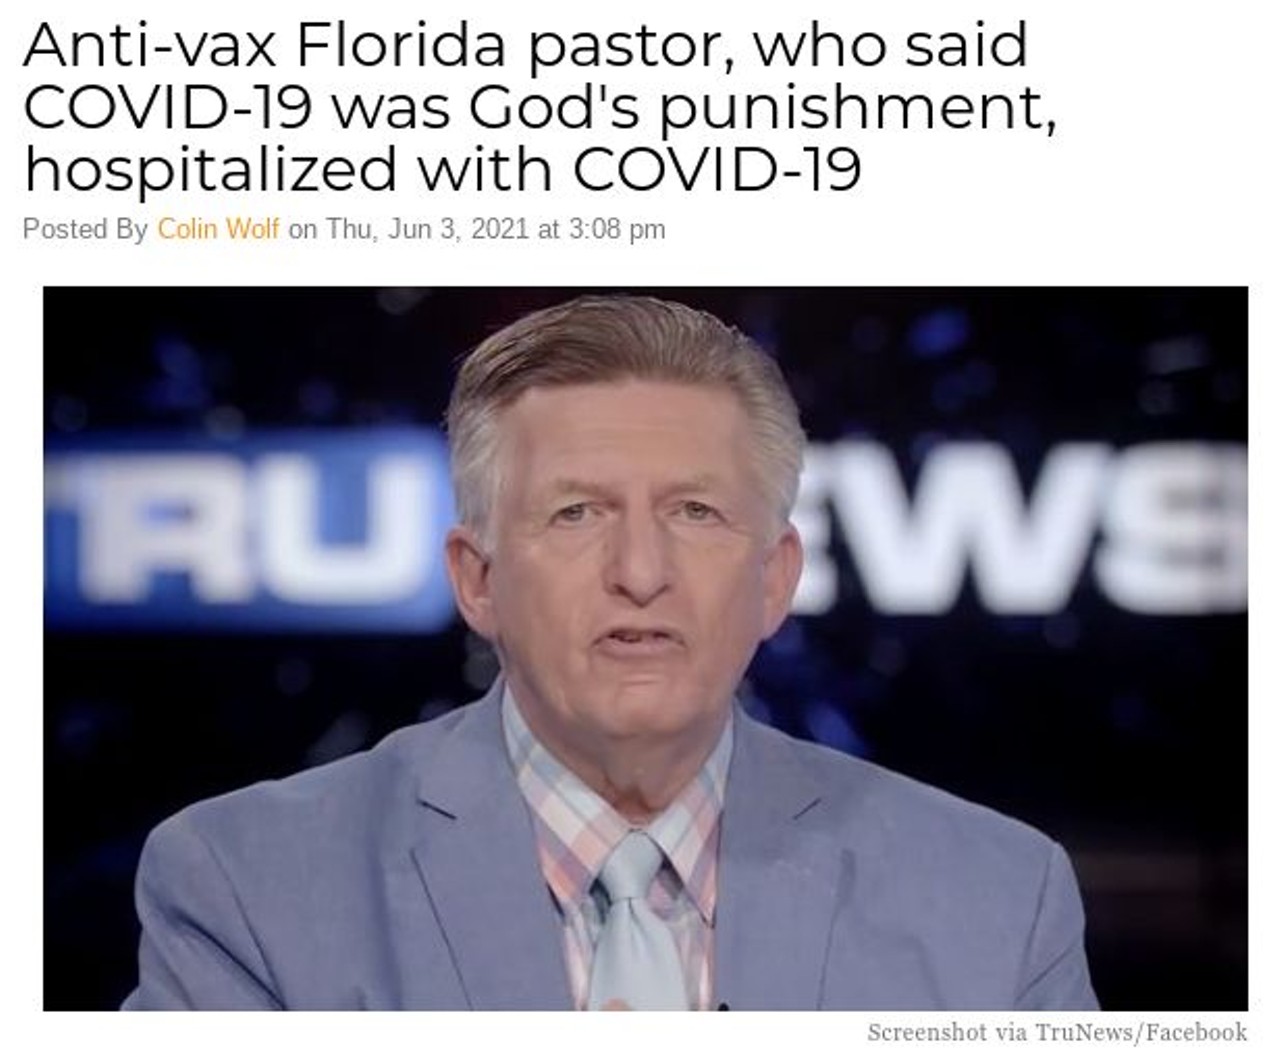 Anti-vax Florida pastor, who said COVID-19 was God's punishment, hospitalized with COVID-19
